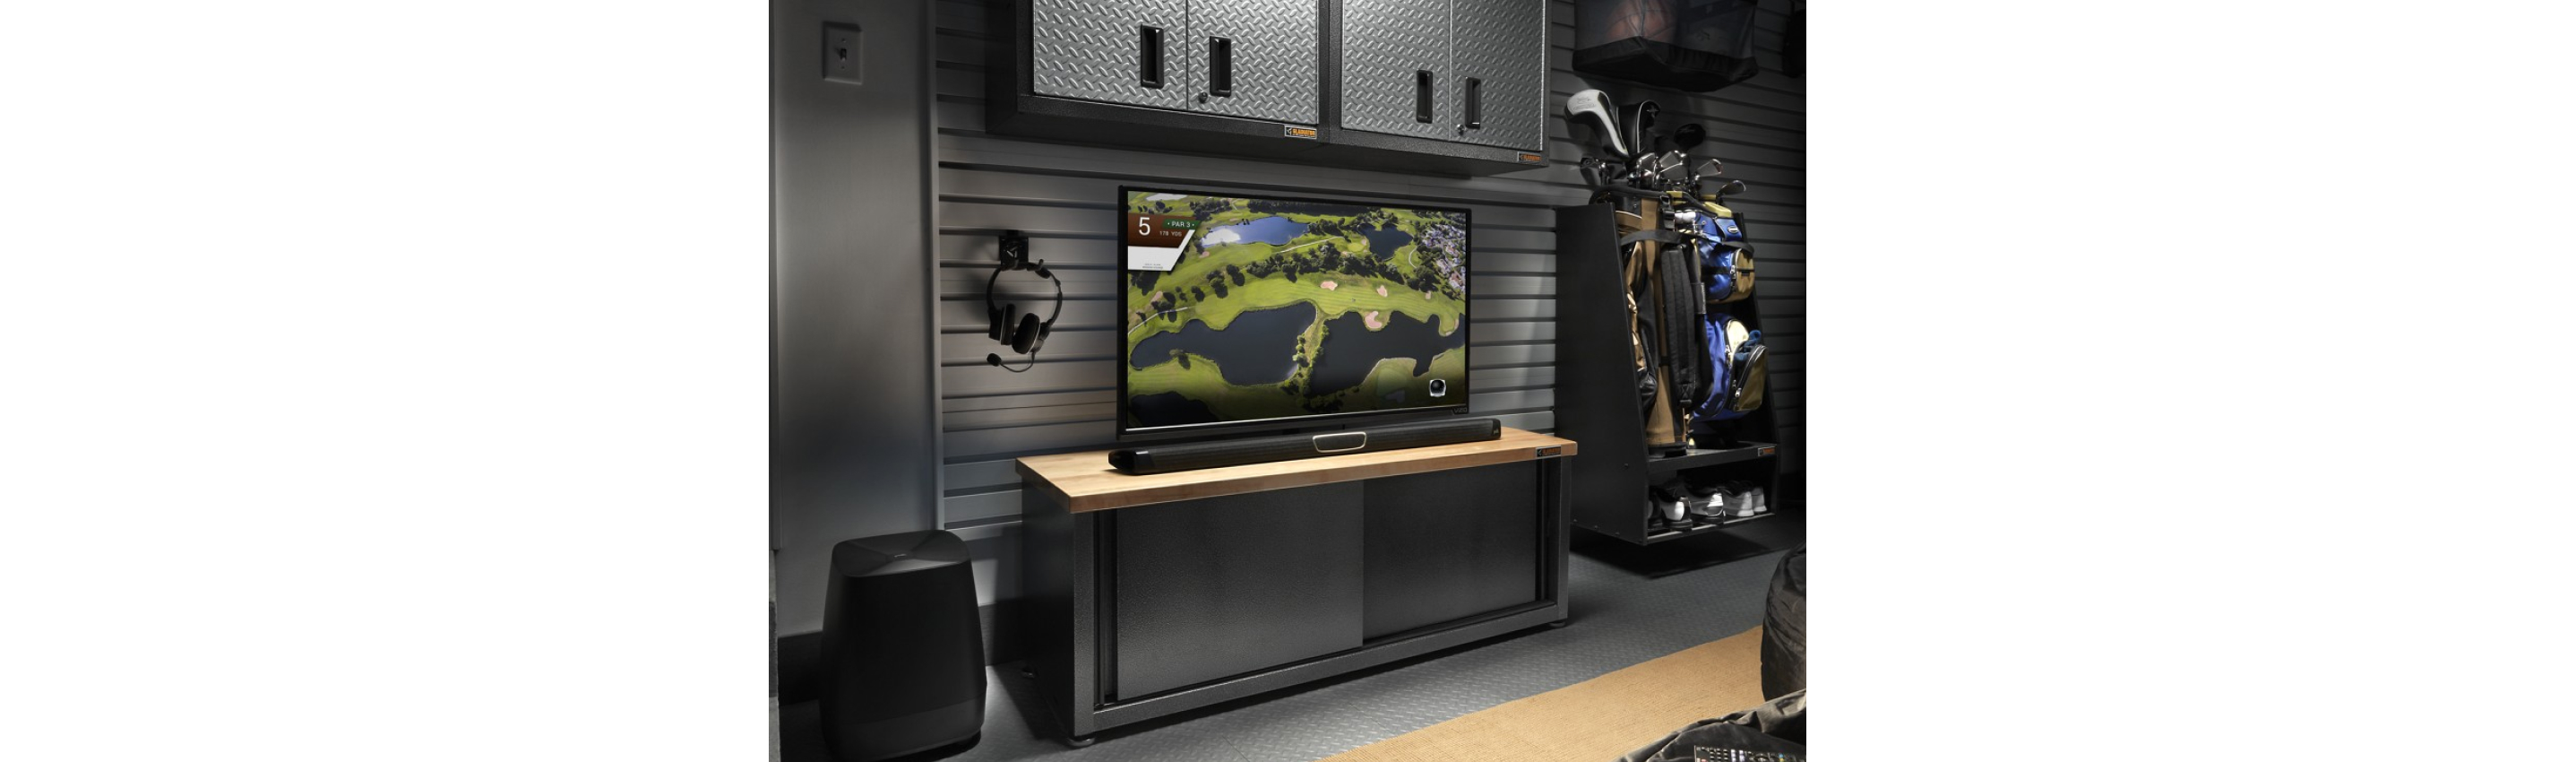 A garage with a TV on a Gladiator Cabinet below a Gladiator Wall Storage Unit. Next to the TV is a storage unit with golf clubs, backpacks and shoes. Hanging on a Gladiator Hook are headphones